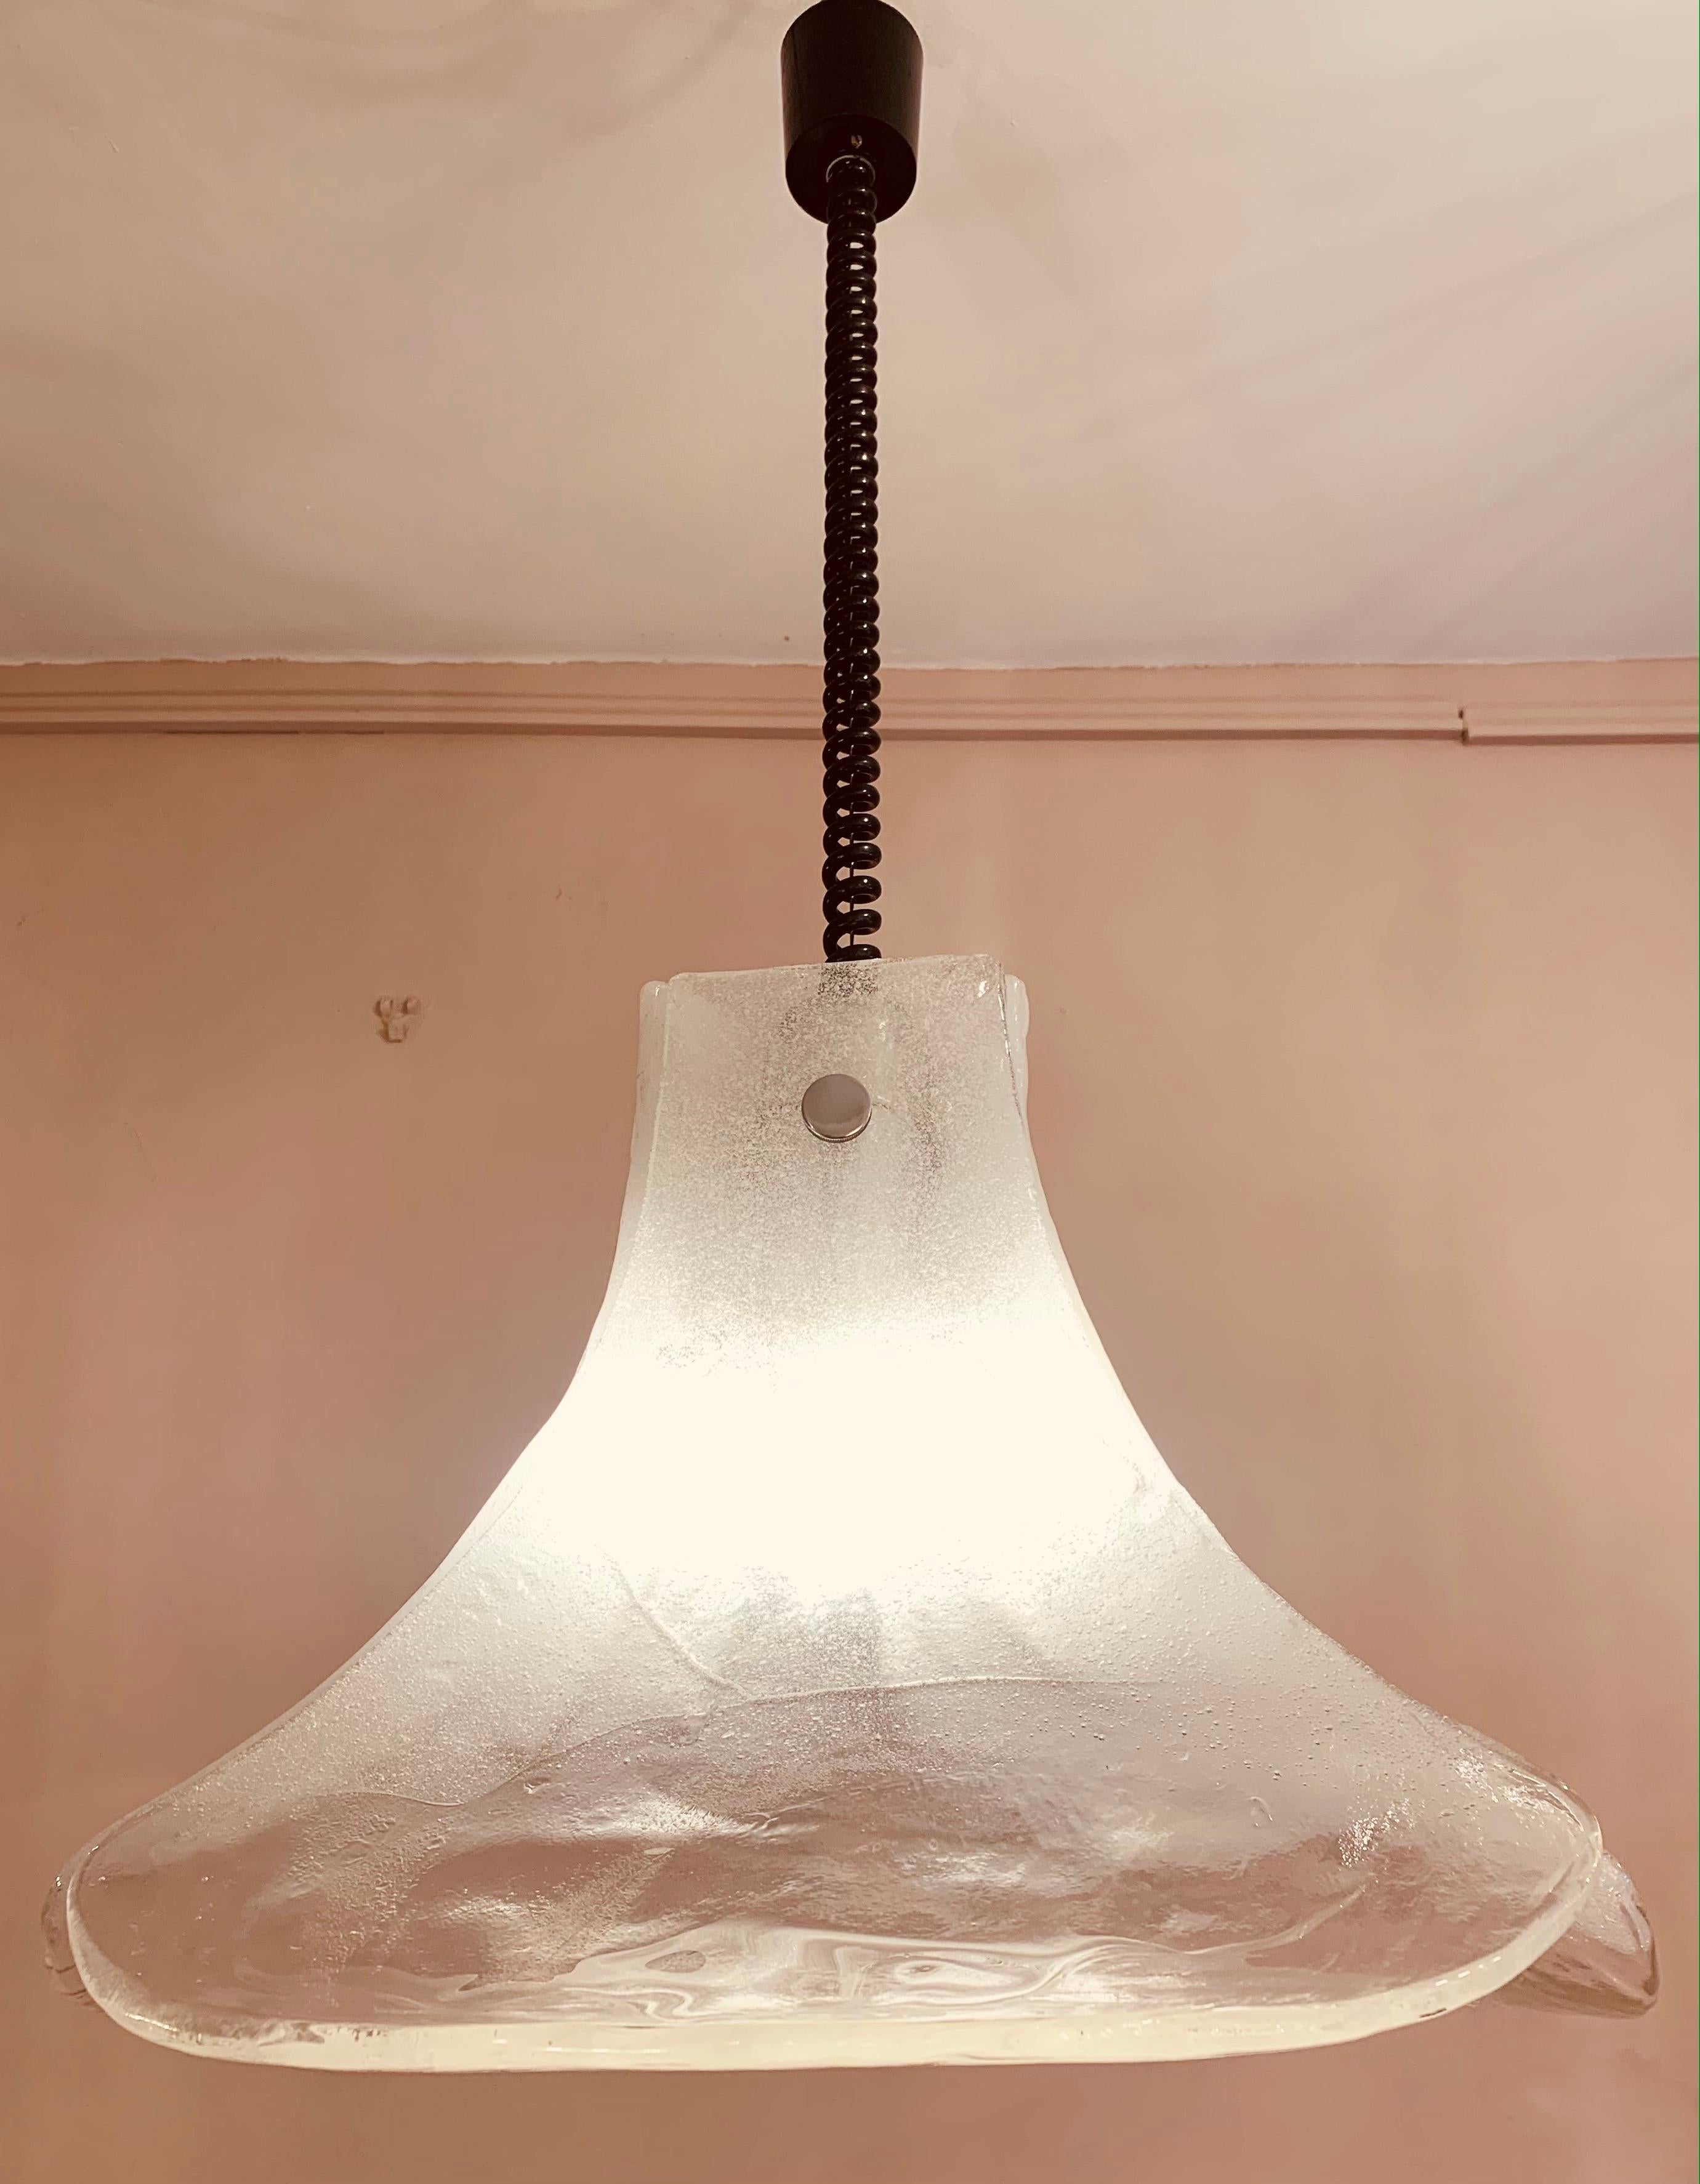 1960s Italian Murano glass hanging pendant light designed by Carlo Nason for AV Mazzega. The three thick glass petals are held onto the frame with a single screw in each. The suspension light is height adjustable based on your requirements. The iced